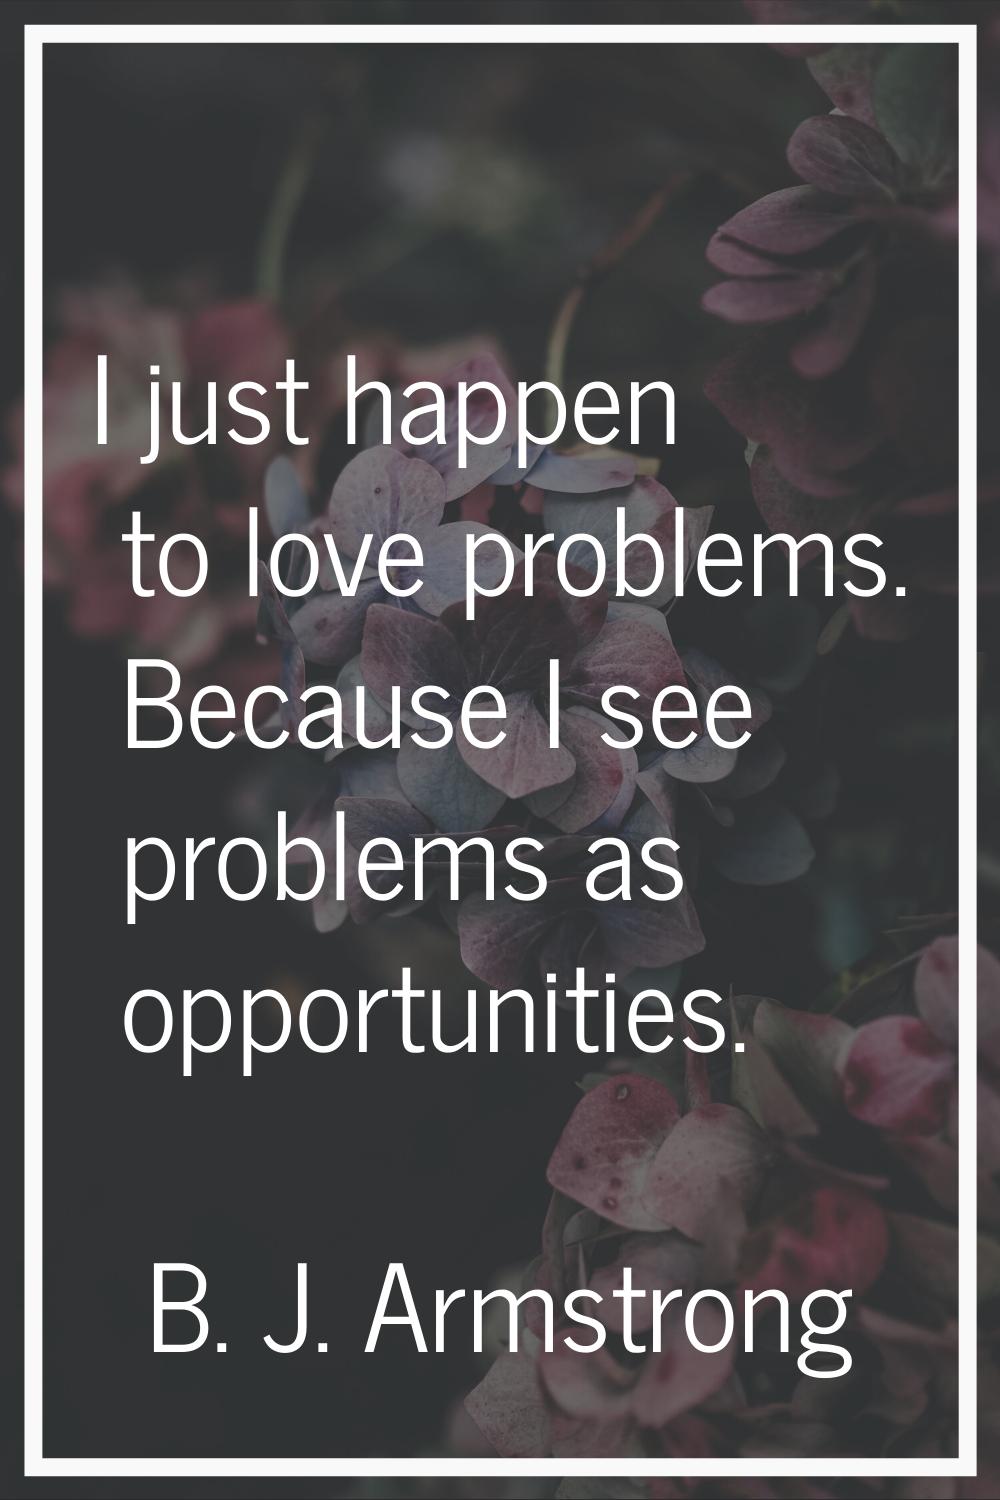 I just happen to love problems. Because I see problems as opportunities.